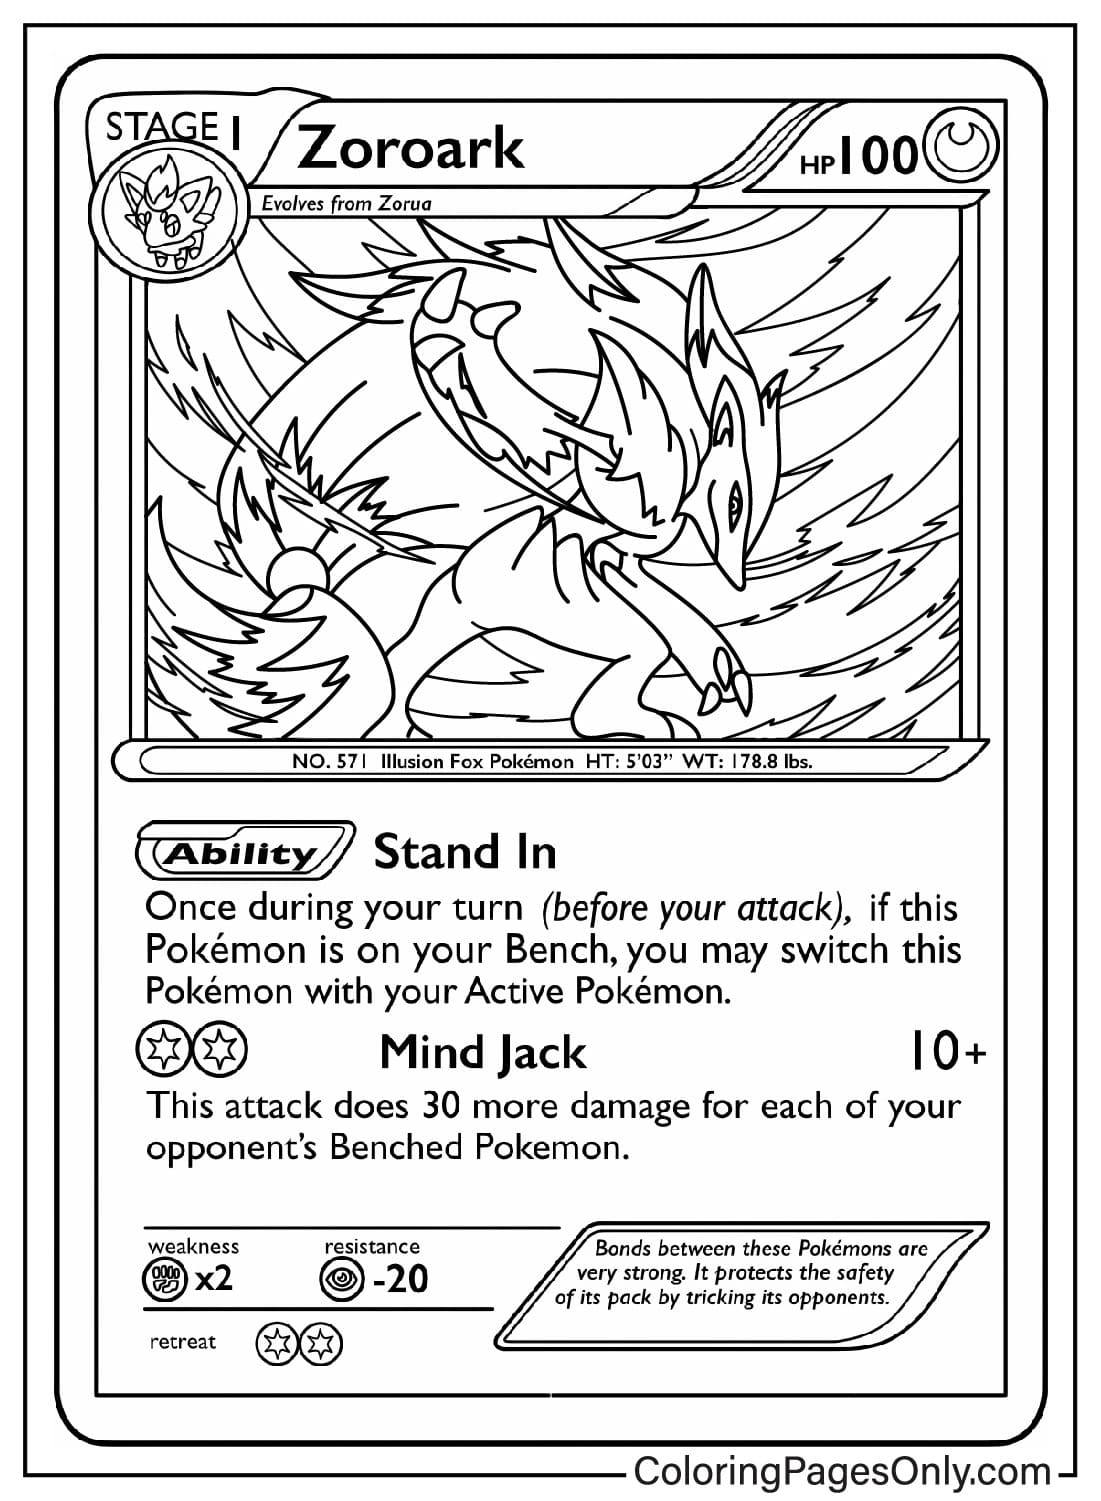 Zoroark Card Coloring Page from Pokemon Card